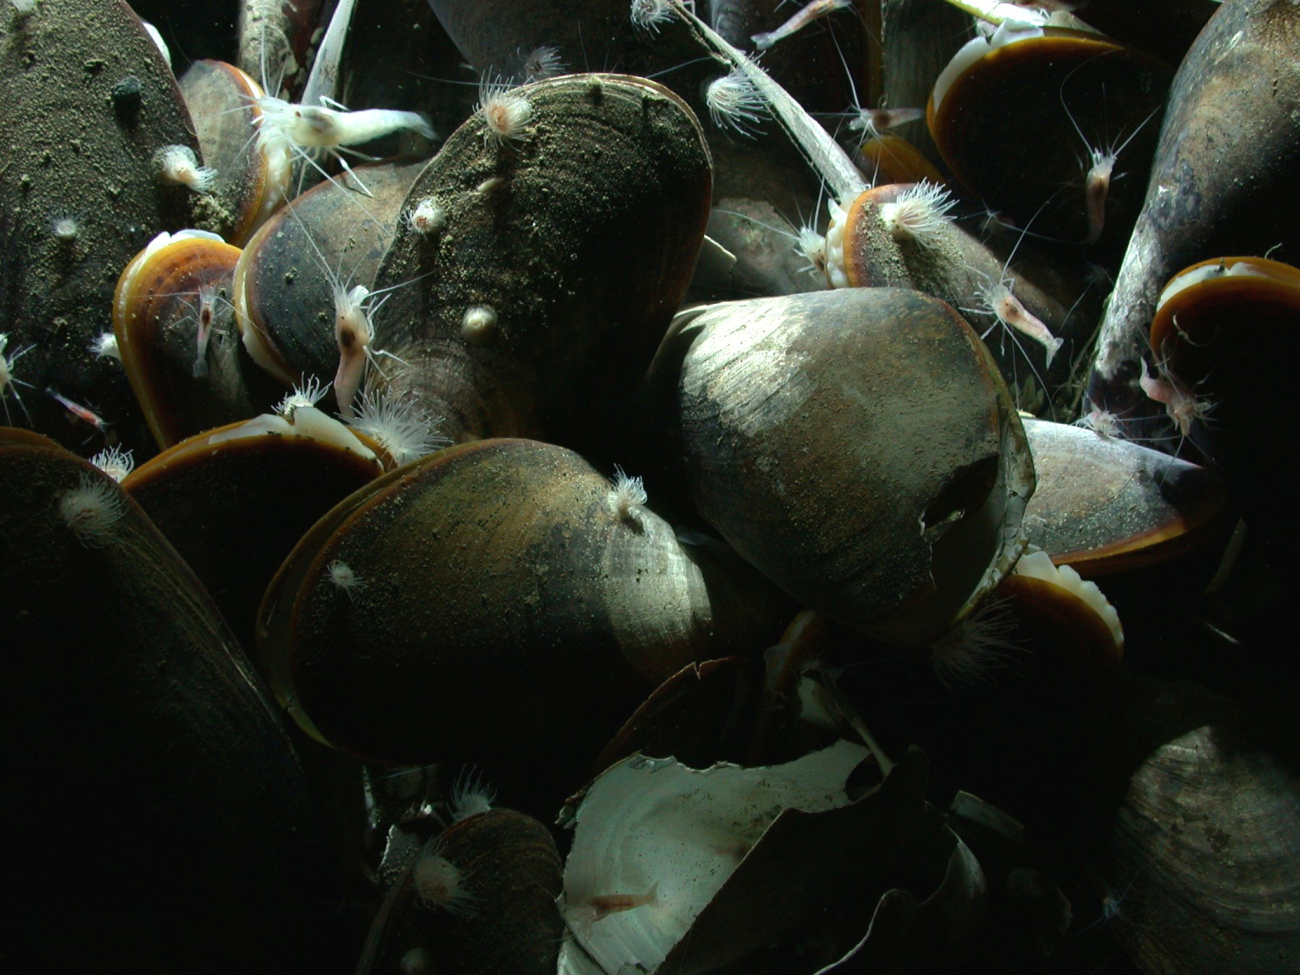 A cold seep community of mussels, white shrimp, and small whiteanemones